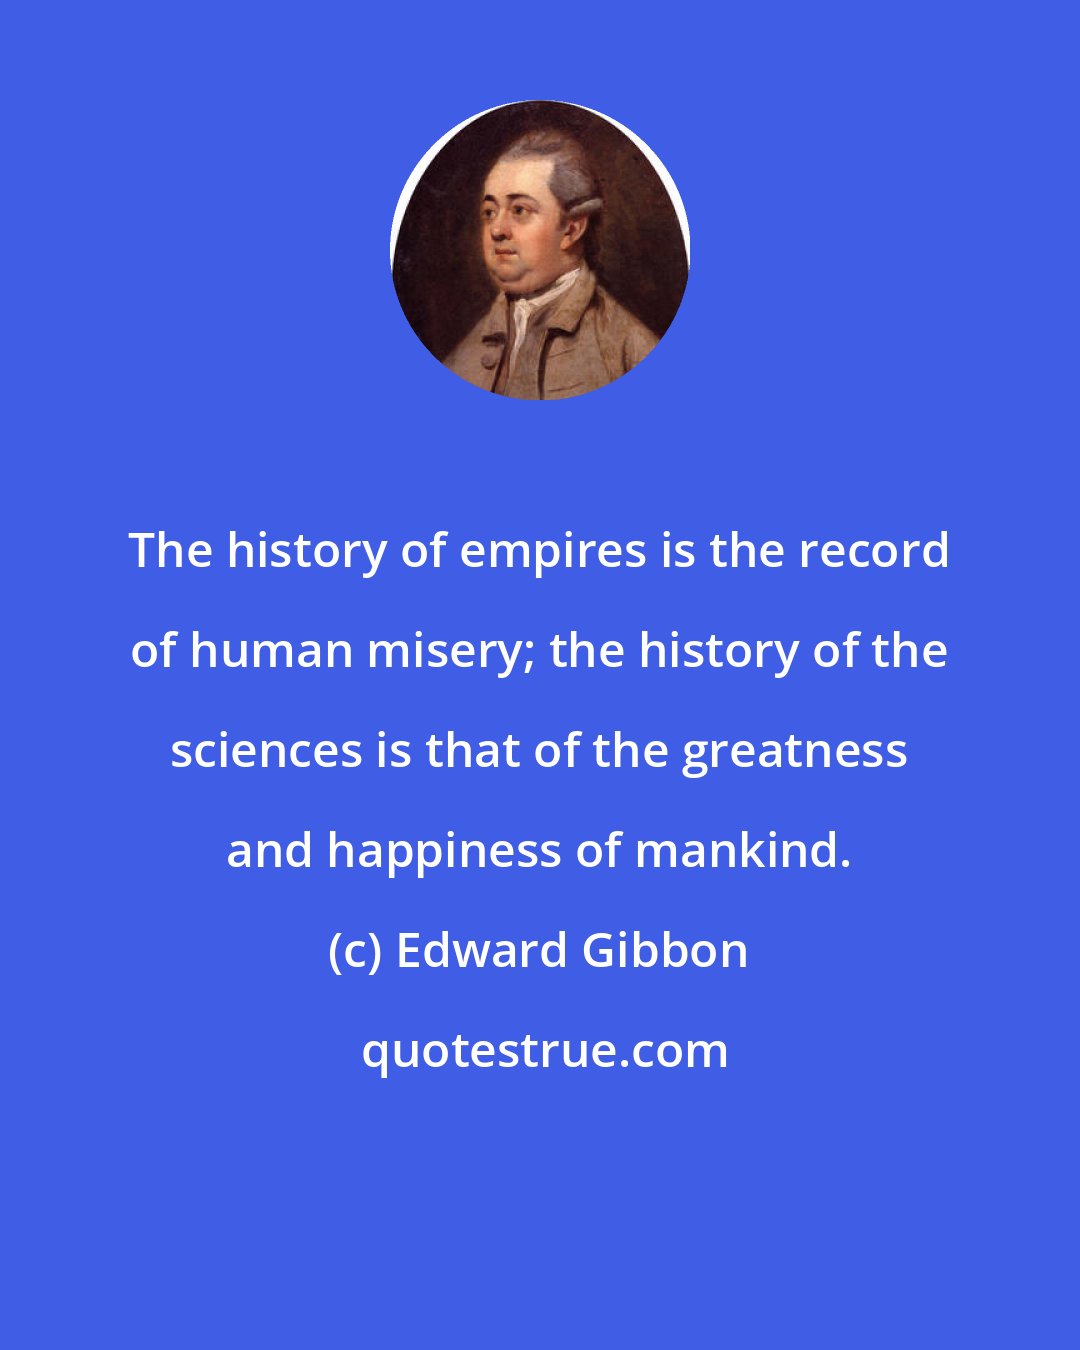 Edward Gibbon: The history of empires is the record of human misery; the history of the sciences is that of the greatness and happiness of mankind.